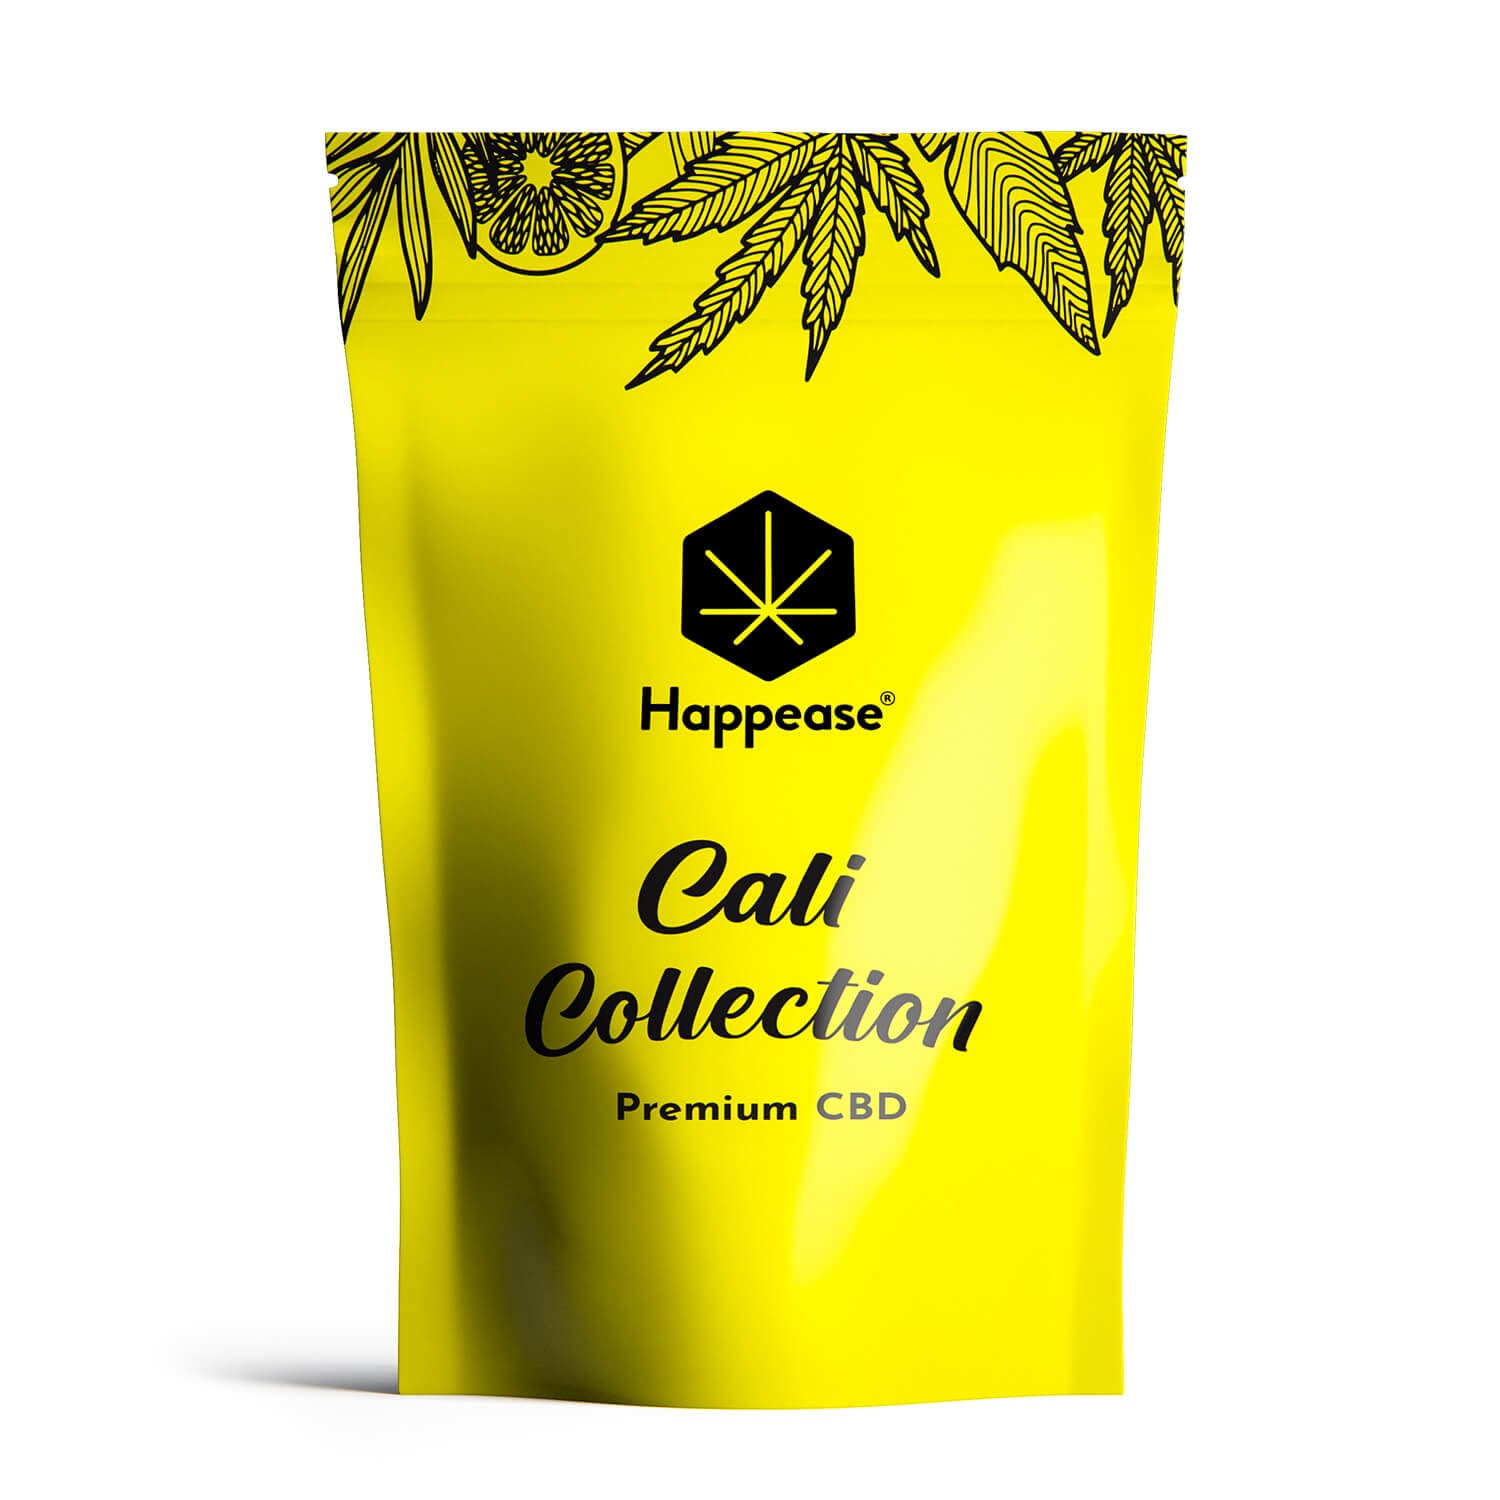 Happease Full Spectrum CBD Oils, Extracts & CBD buds are now in Cyprus